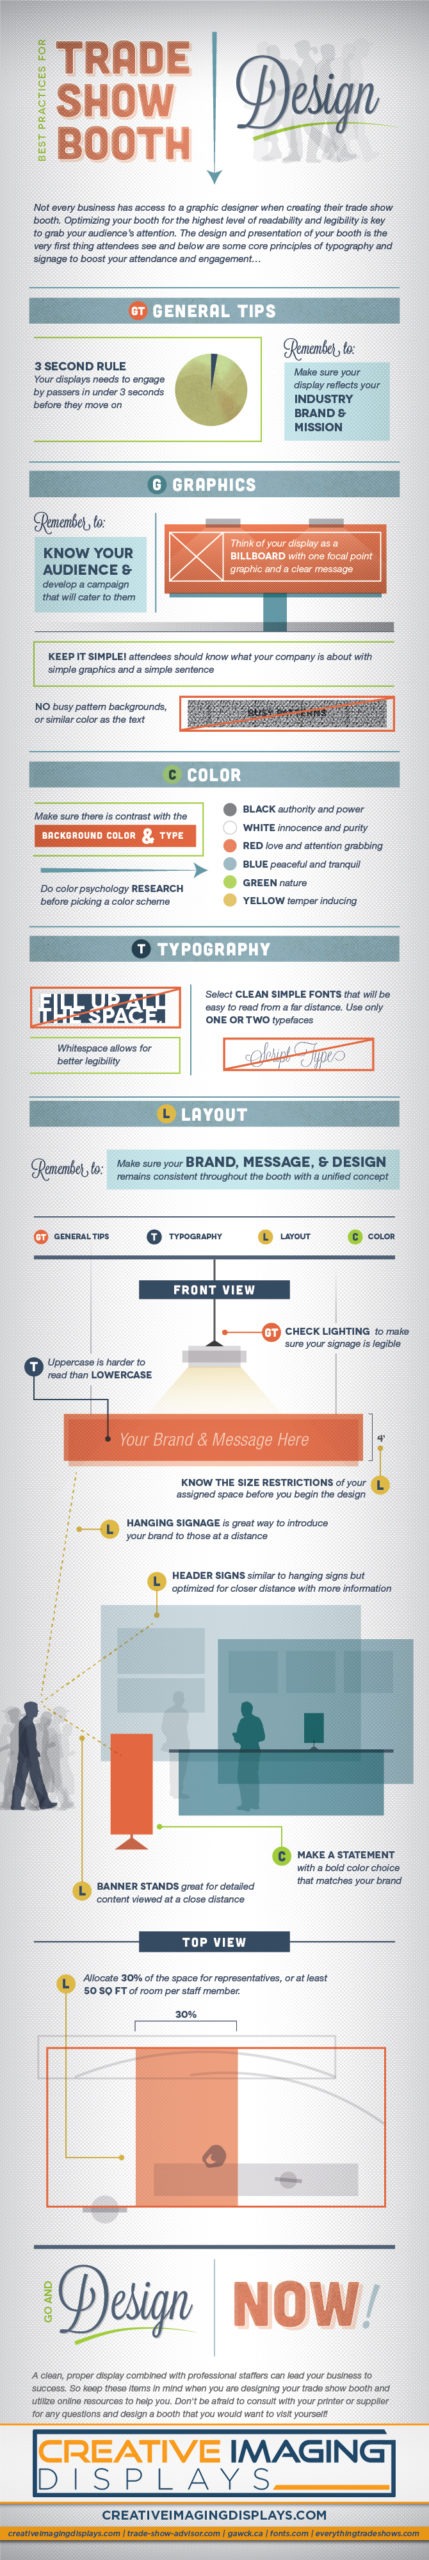 Best Practices Trade Show Booth Design Infographic